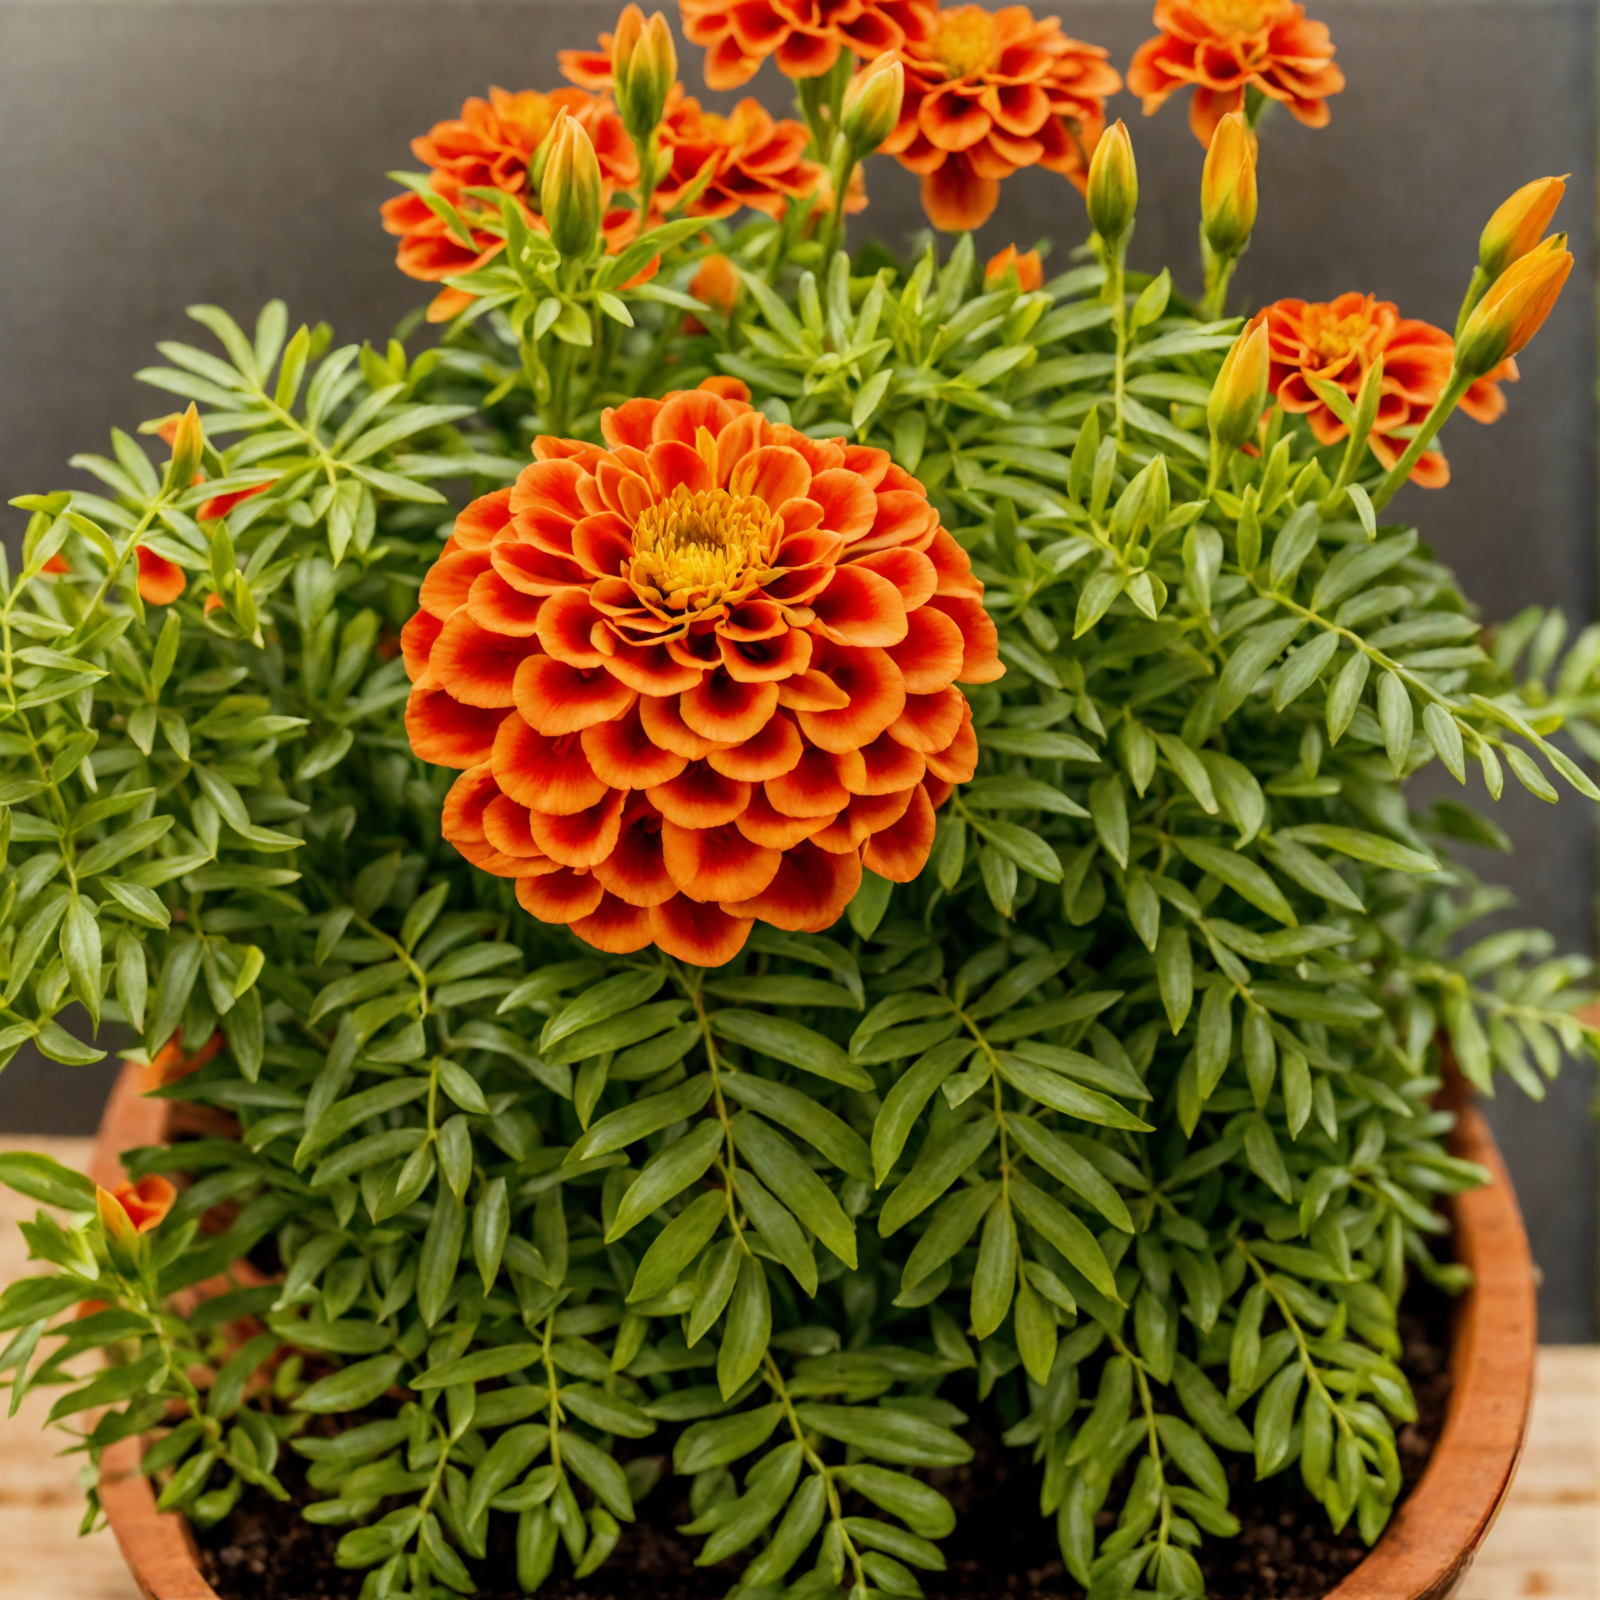 A vibrant cluster of Tagetes erecta (marigolds) in a wooden bowl, with clear lighting against a dark background.